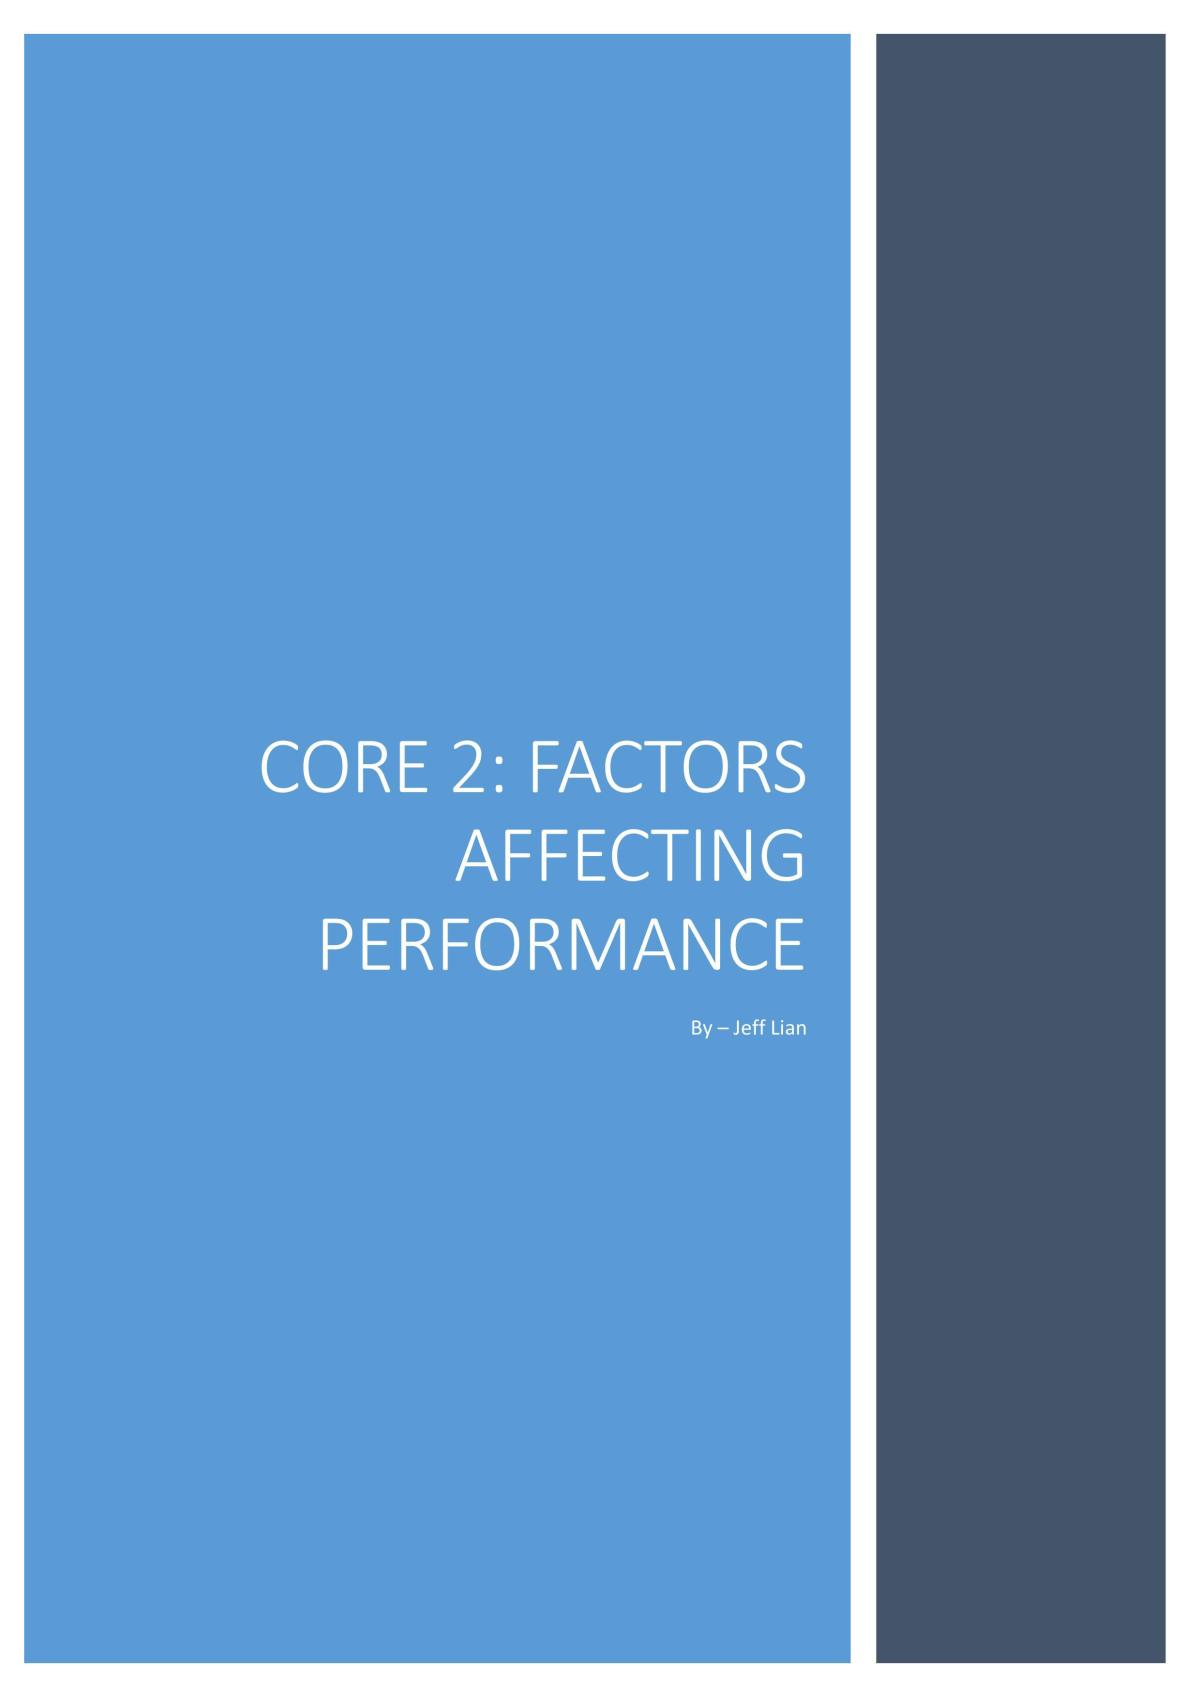 Factors Affecting Performance  - Page 1